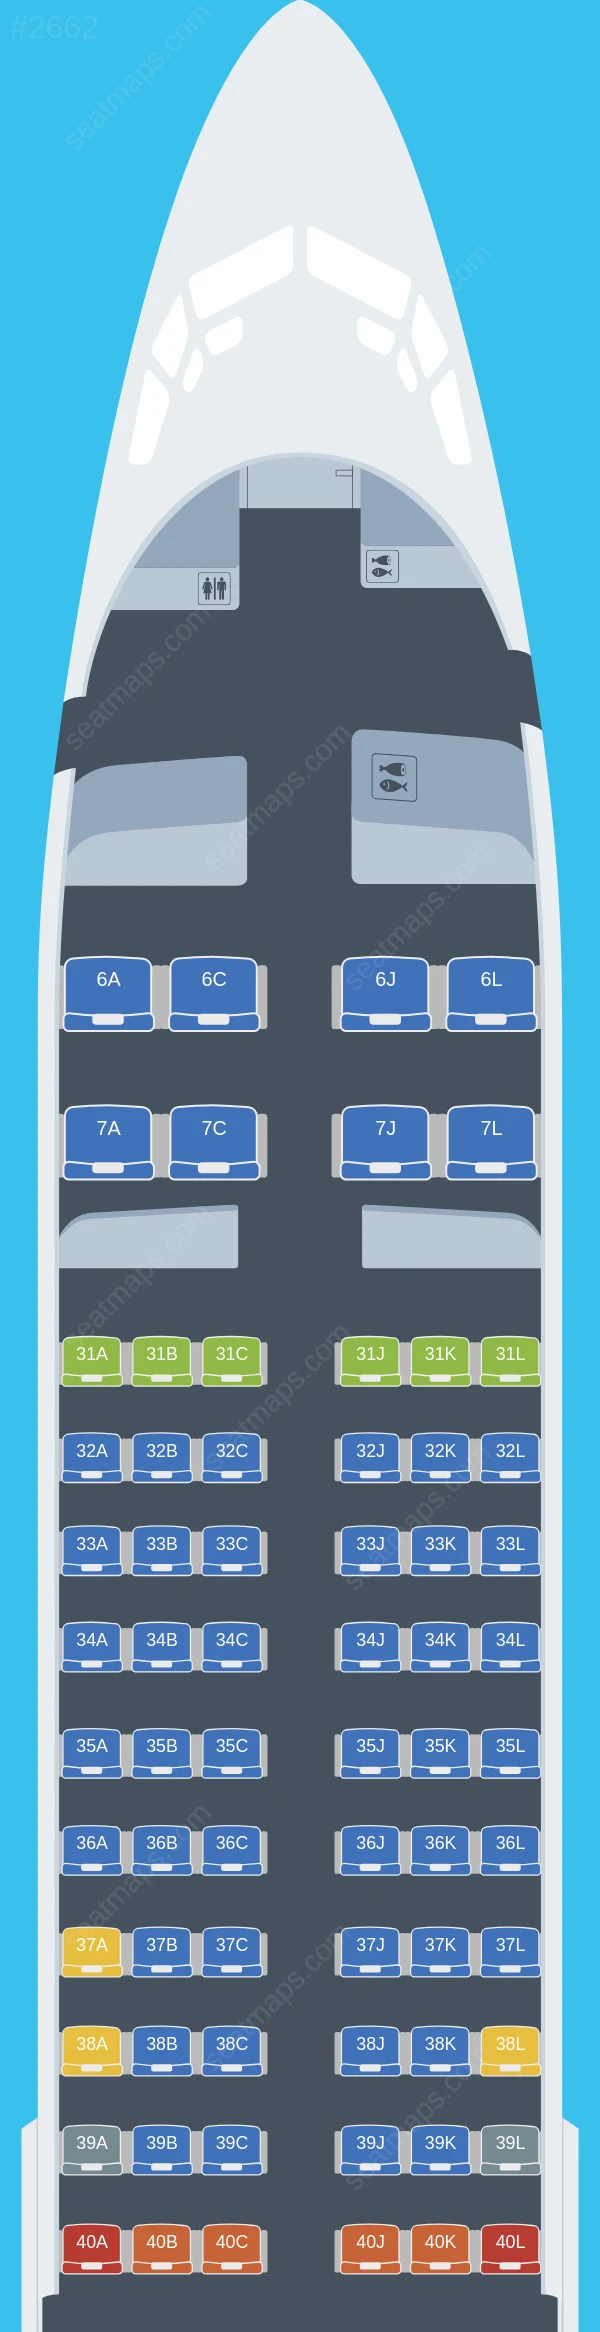 China Eastern Boeing 737-800 V.1 seatmap preview